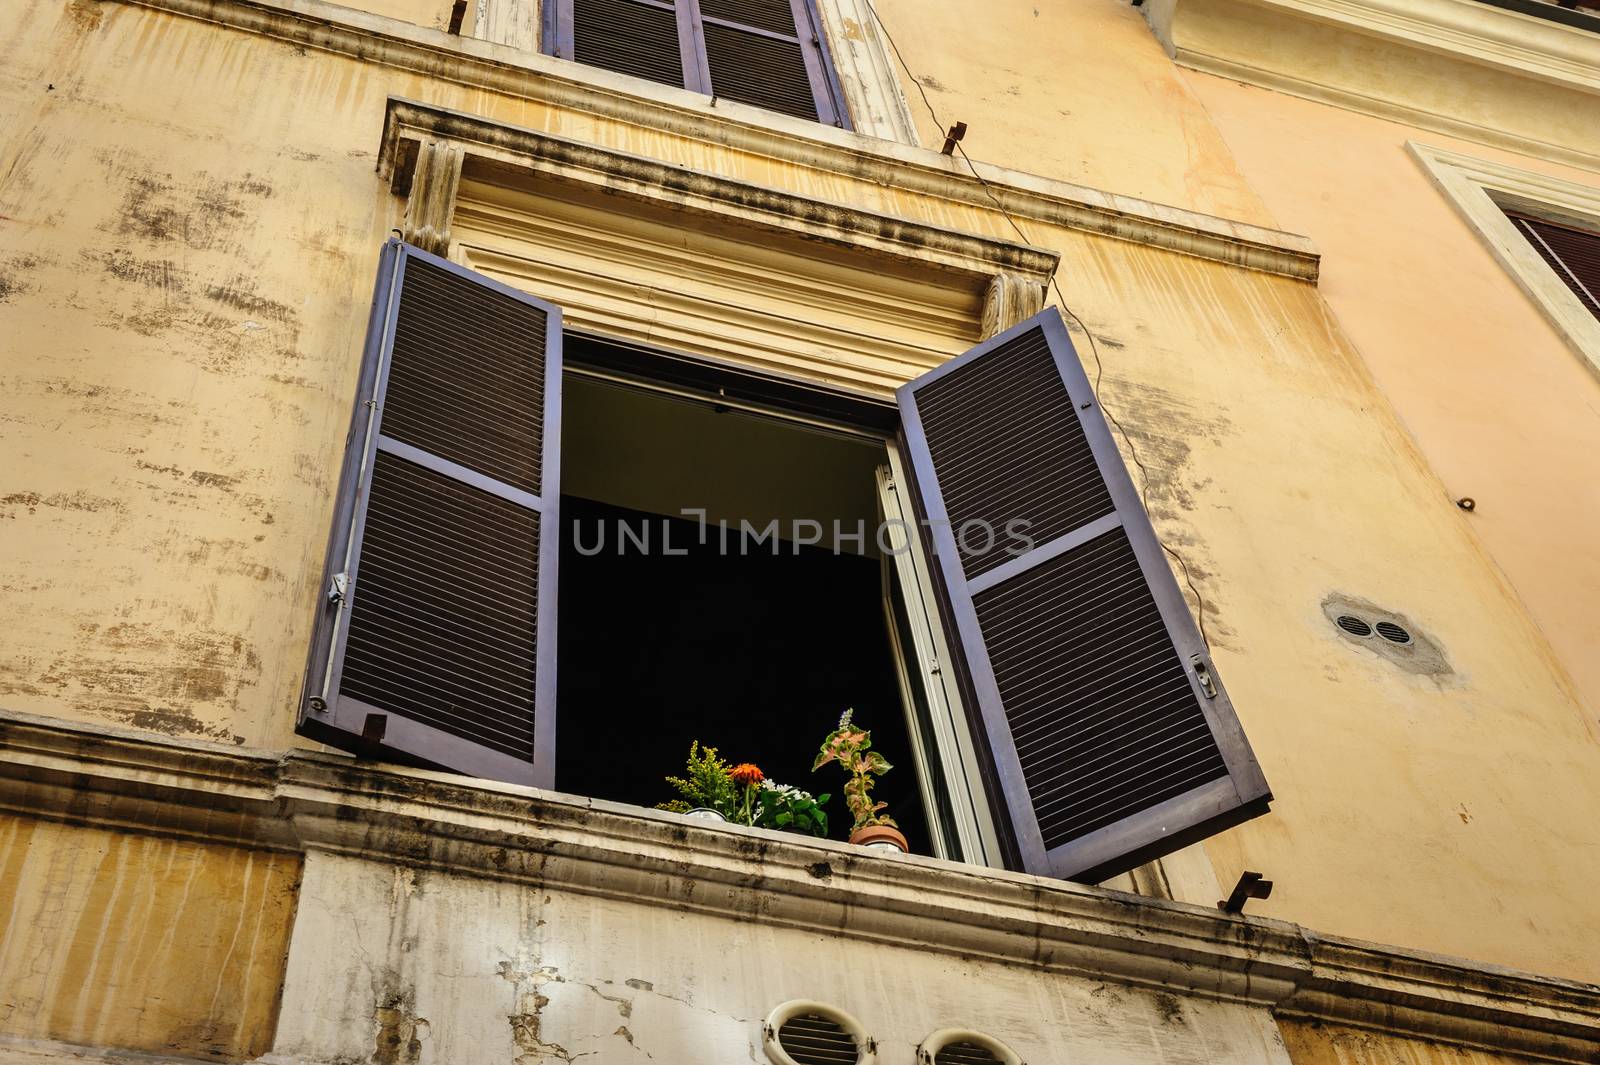 Window with flowers and blinds, old streets of Rome, Italy